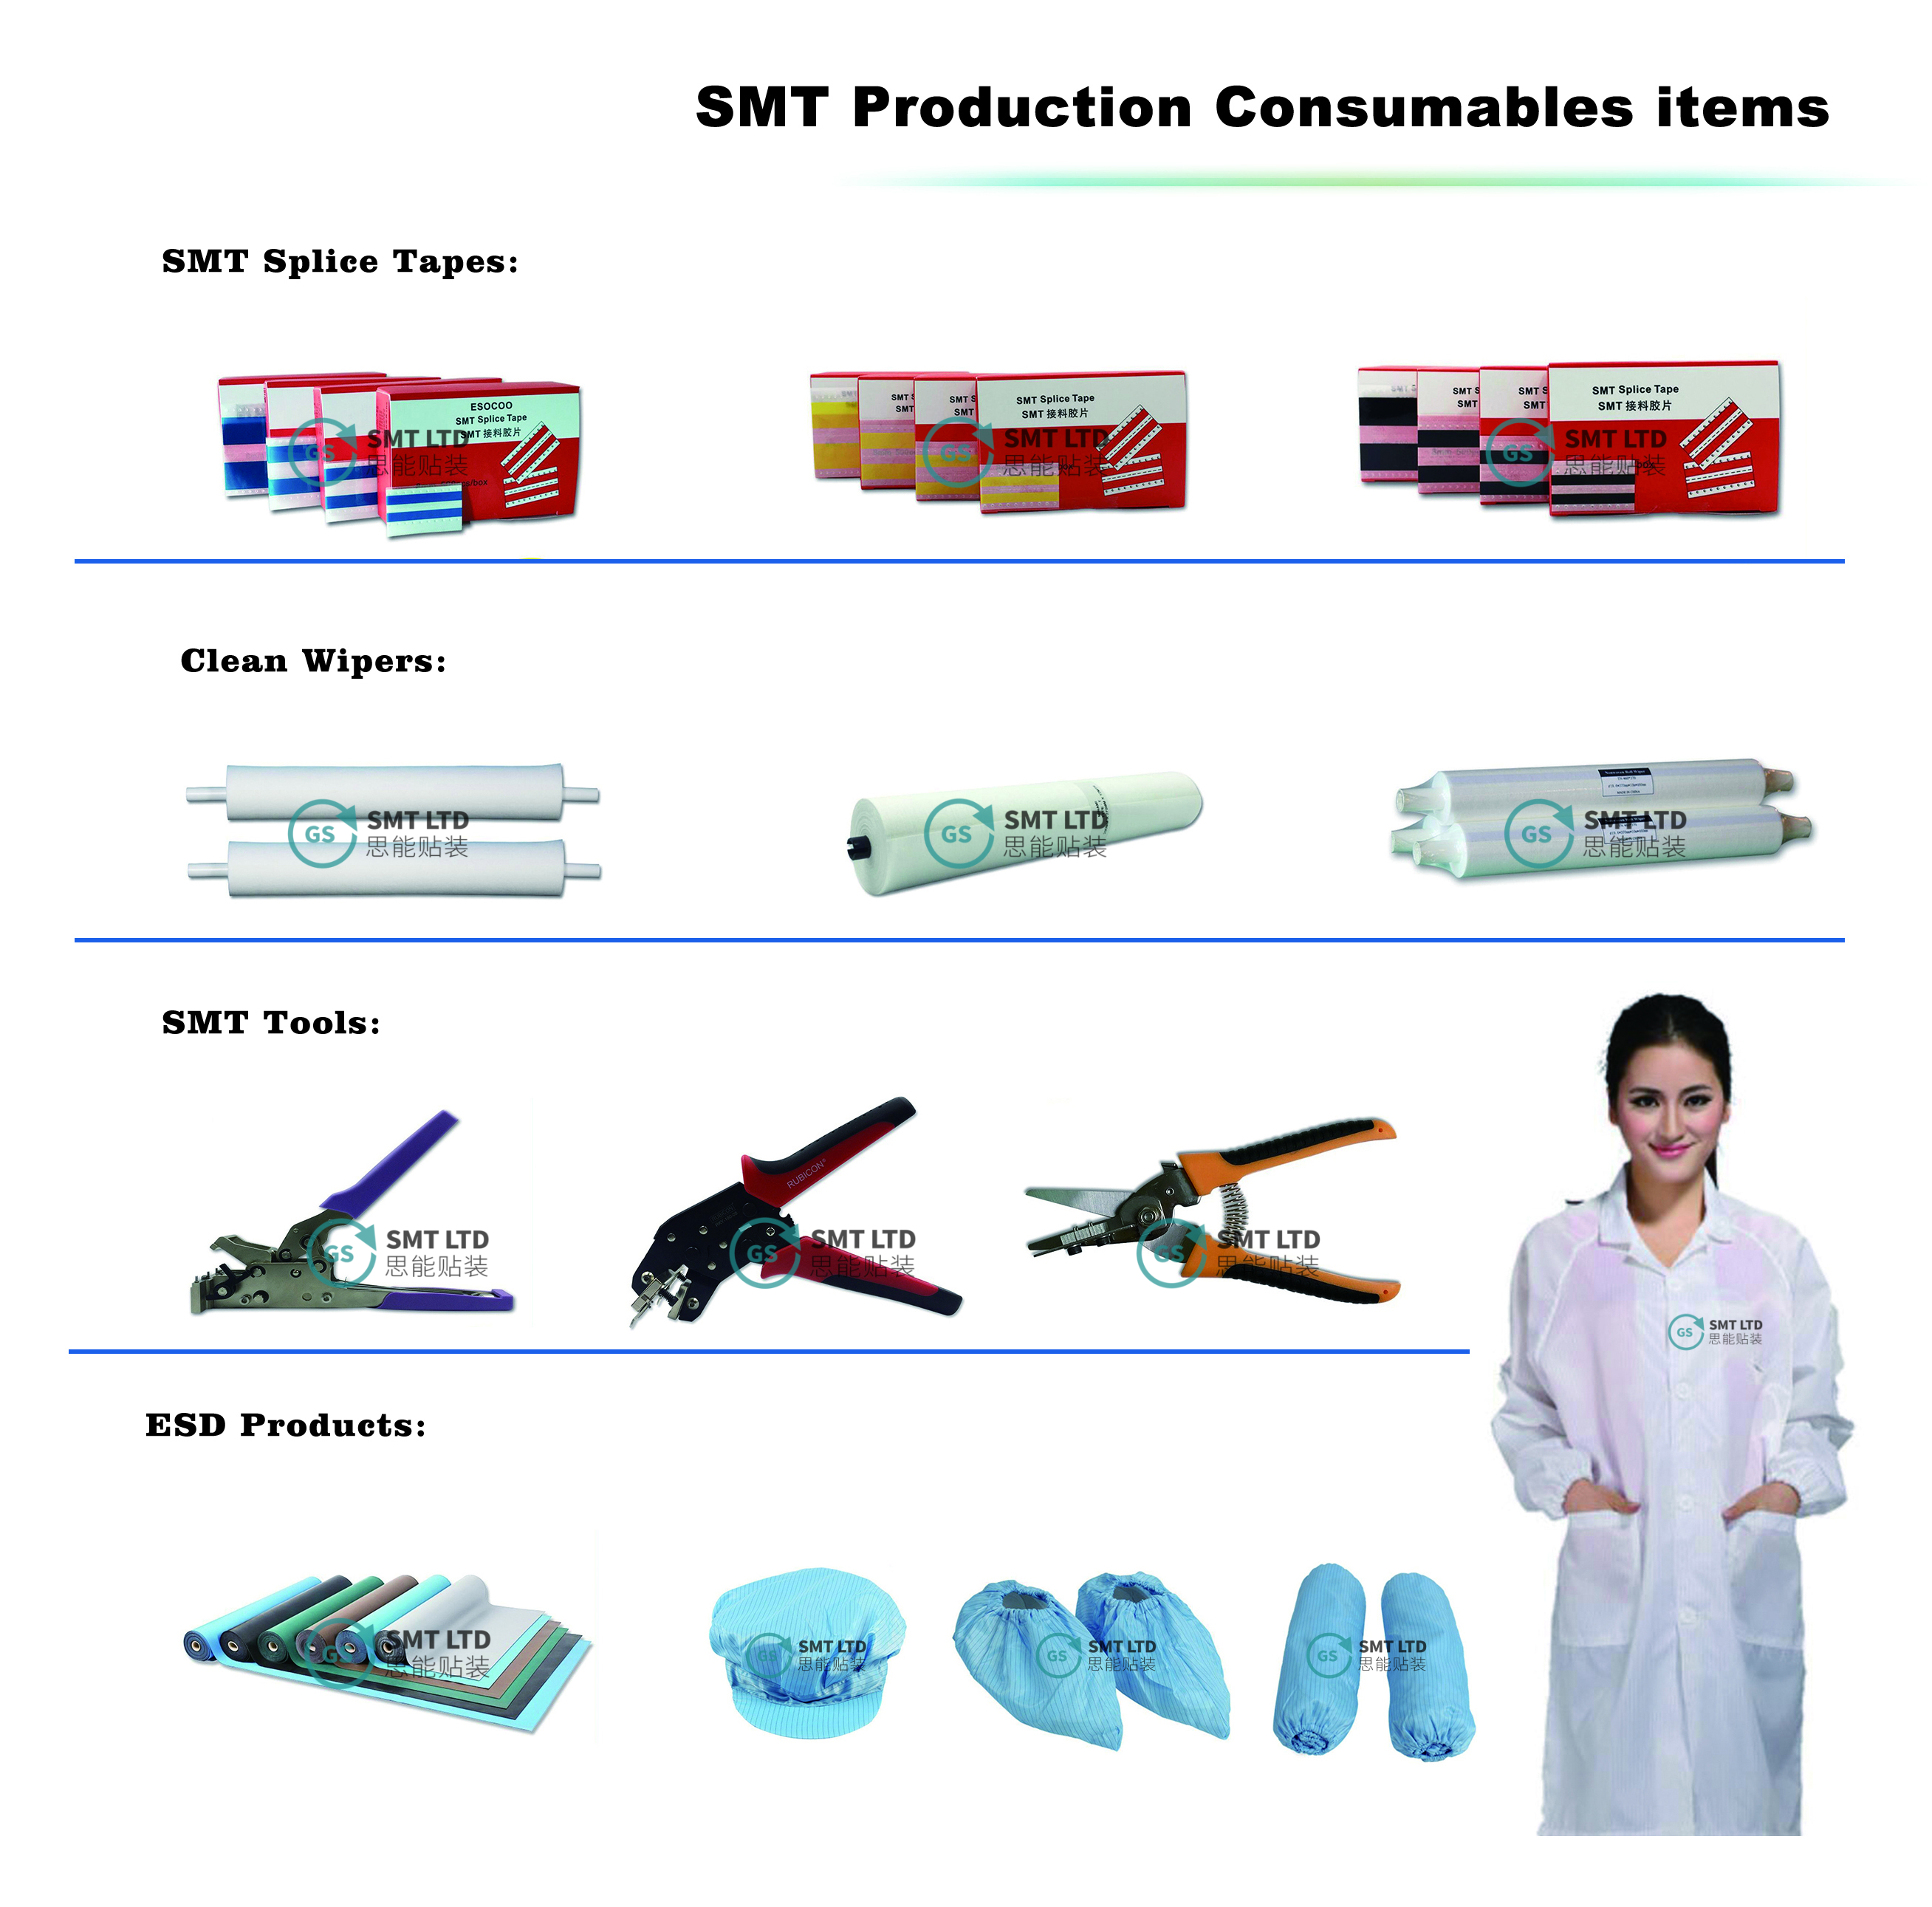 SMT Production Consumables items